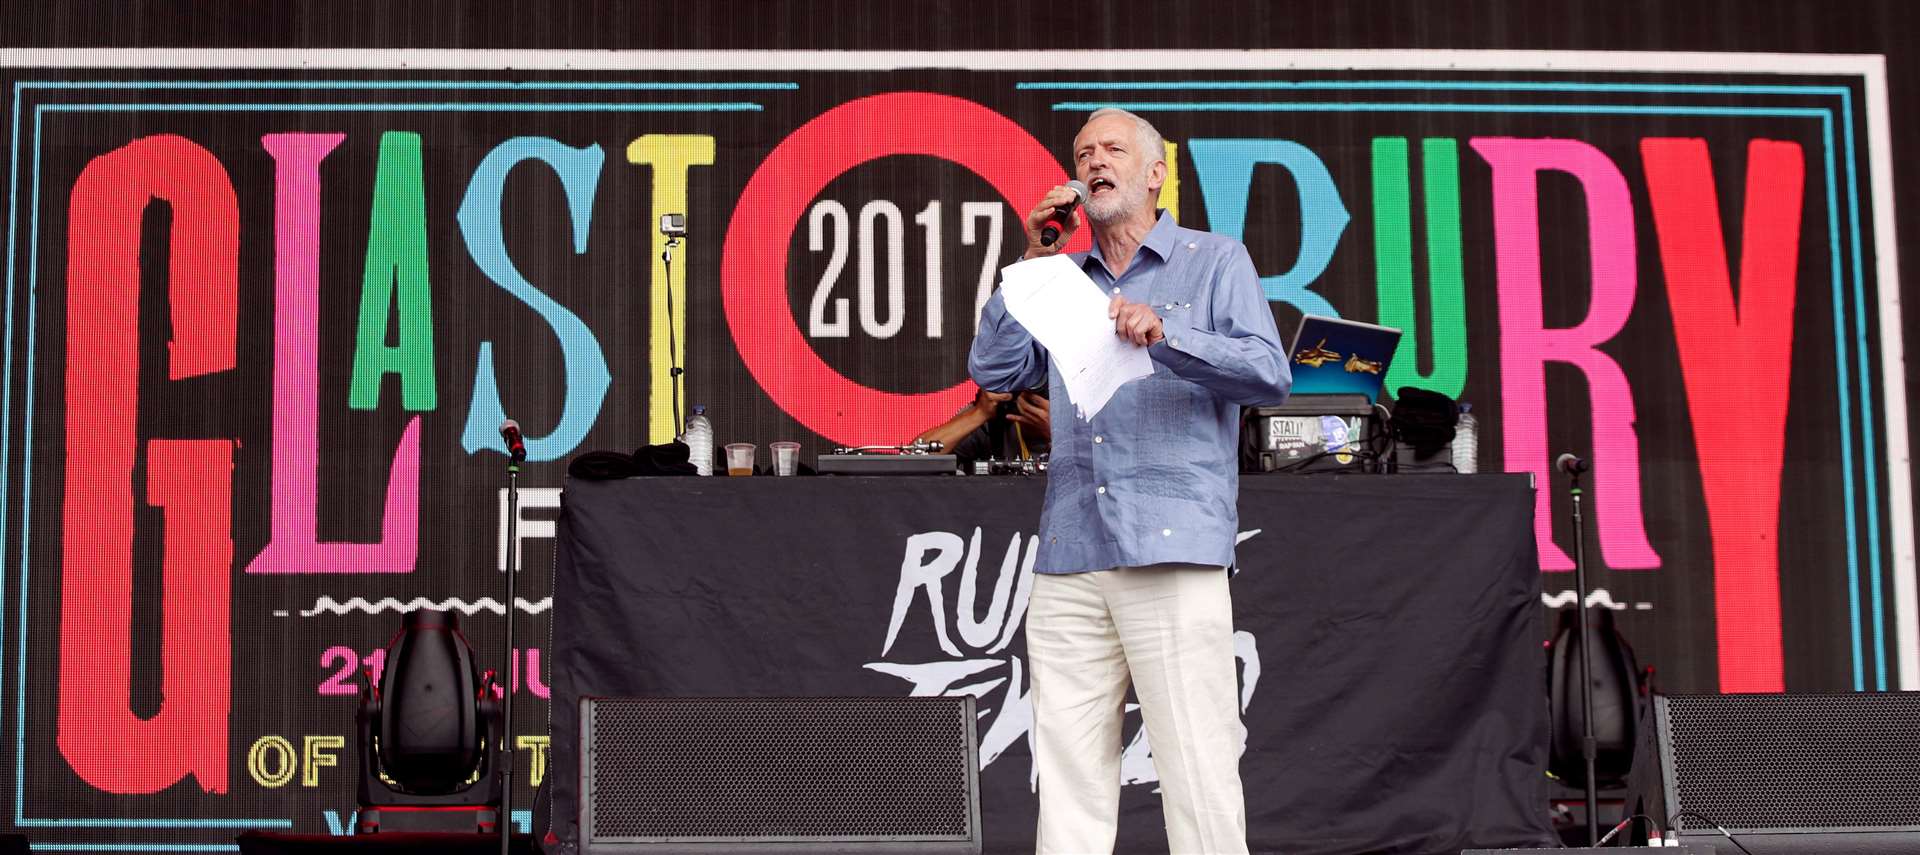 Labour leader Jeremy Corbyn speaks to the crowd from the Pyramid stage at Glastonbury in 2017 (Yui Mok/PA)